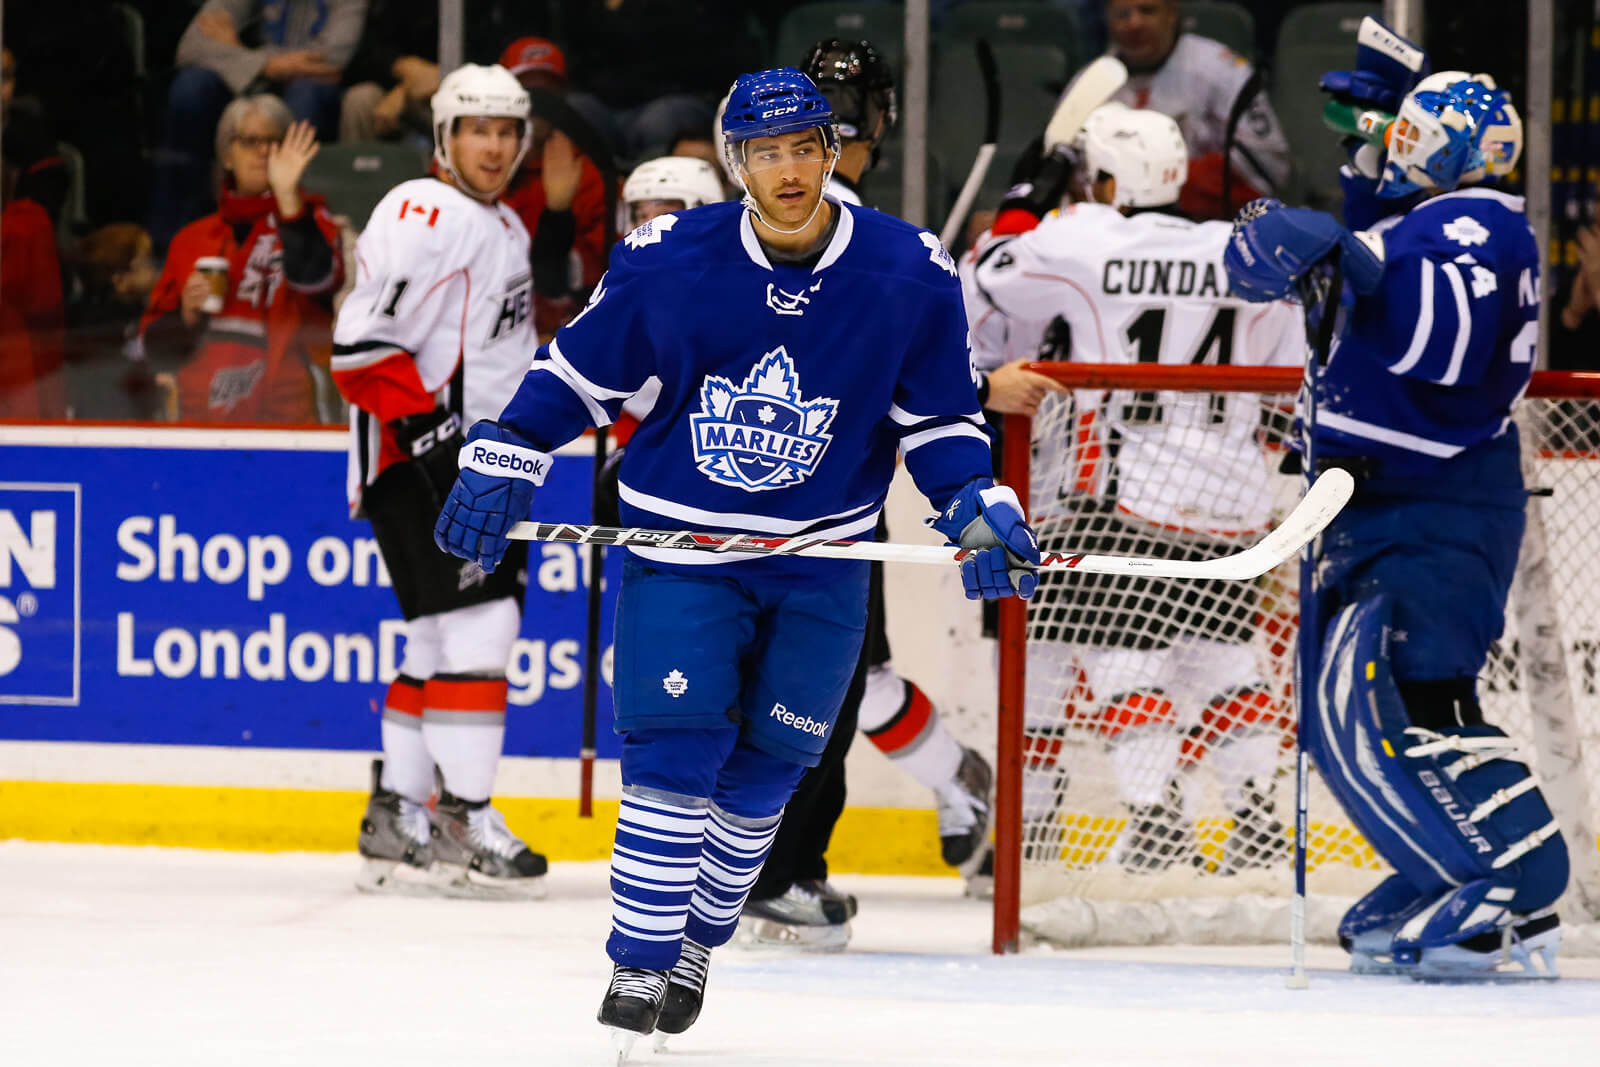 Andrew Crescenzi playing with the Toronto Marlies